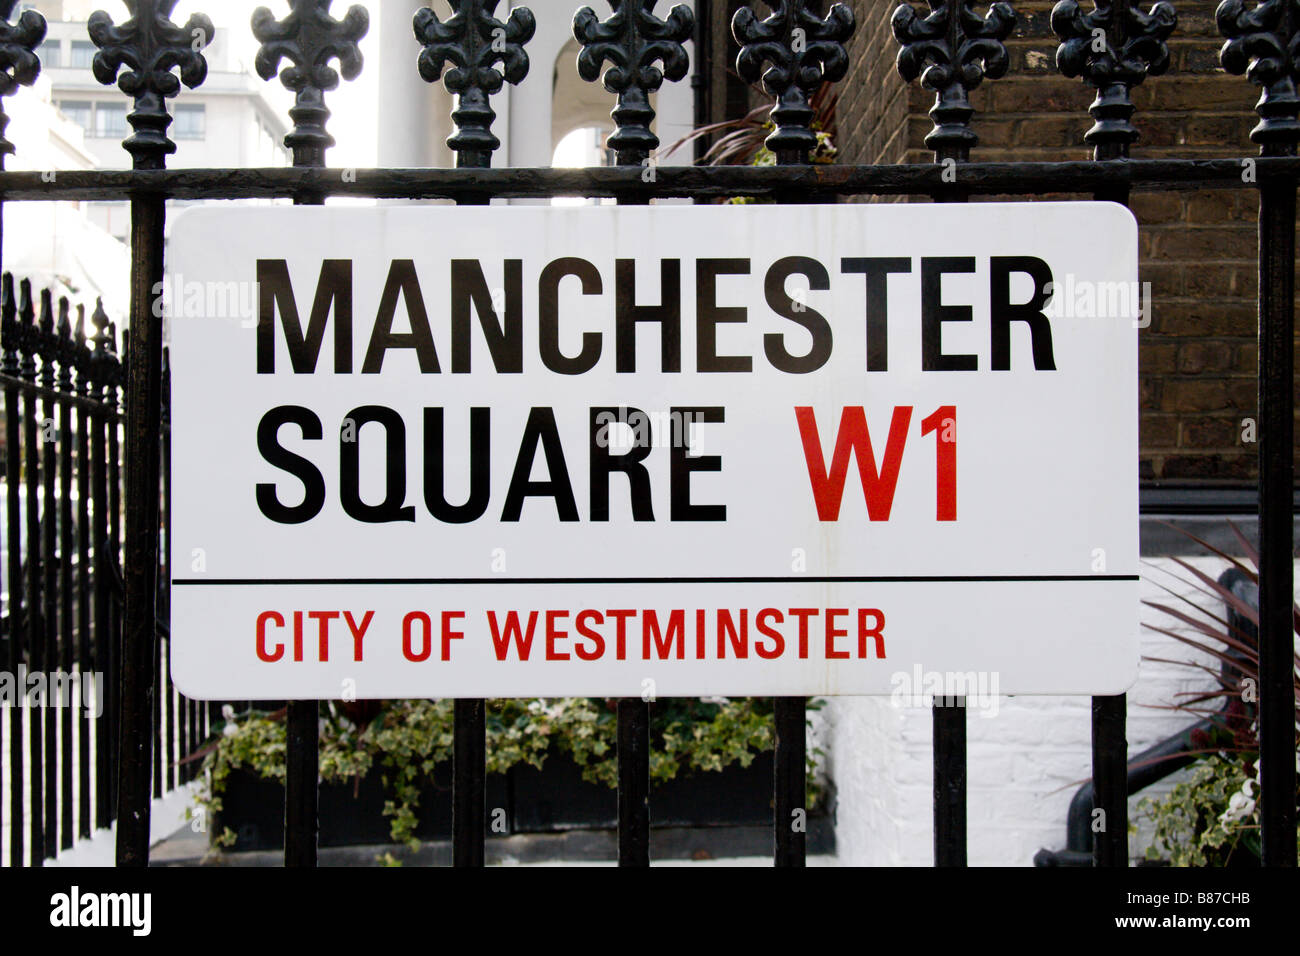 Street sign for Manchester Square, Westminster, London.  Jan 2009 Stock Photo